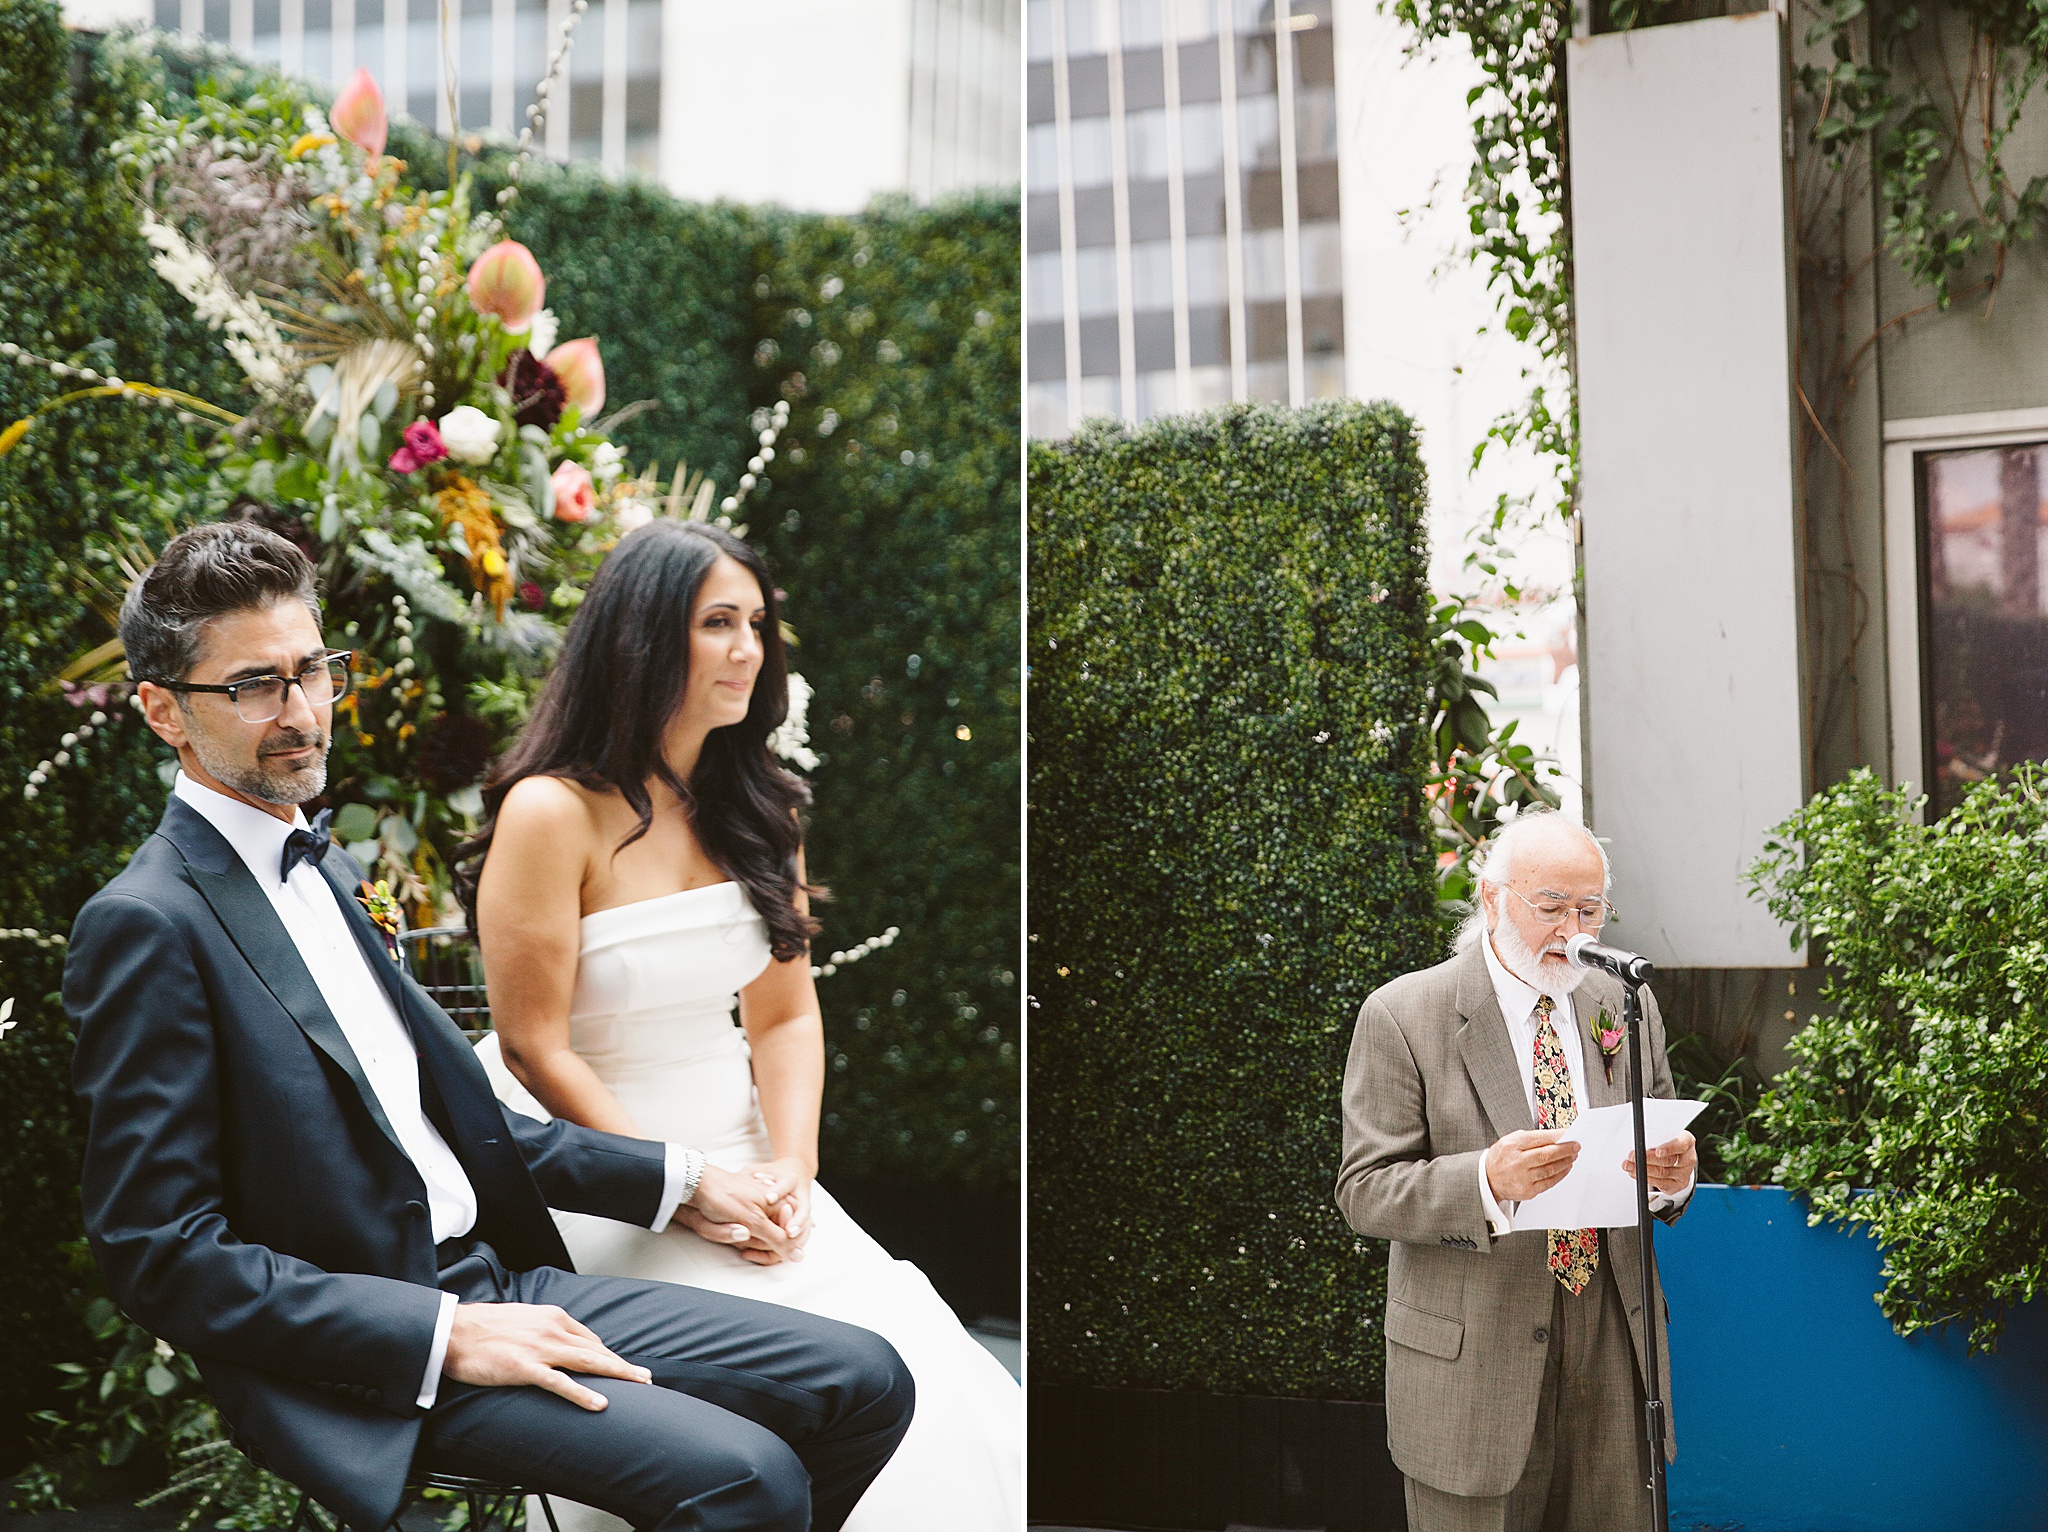 The line wedding pictures in los angeles